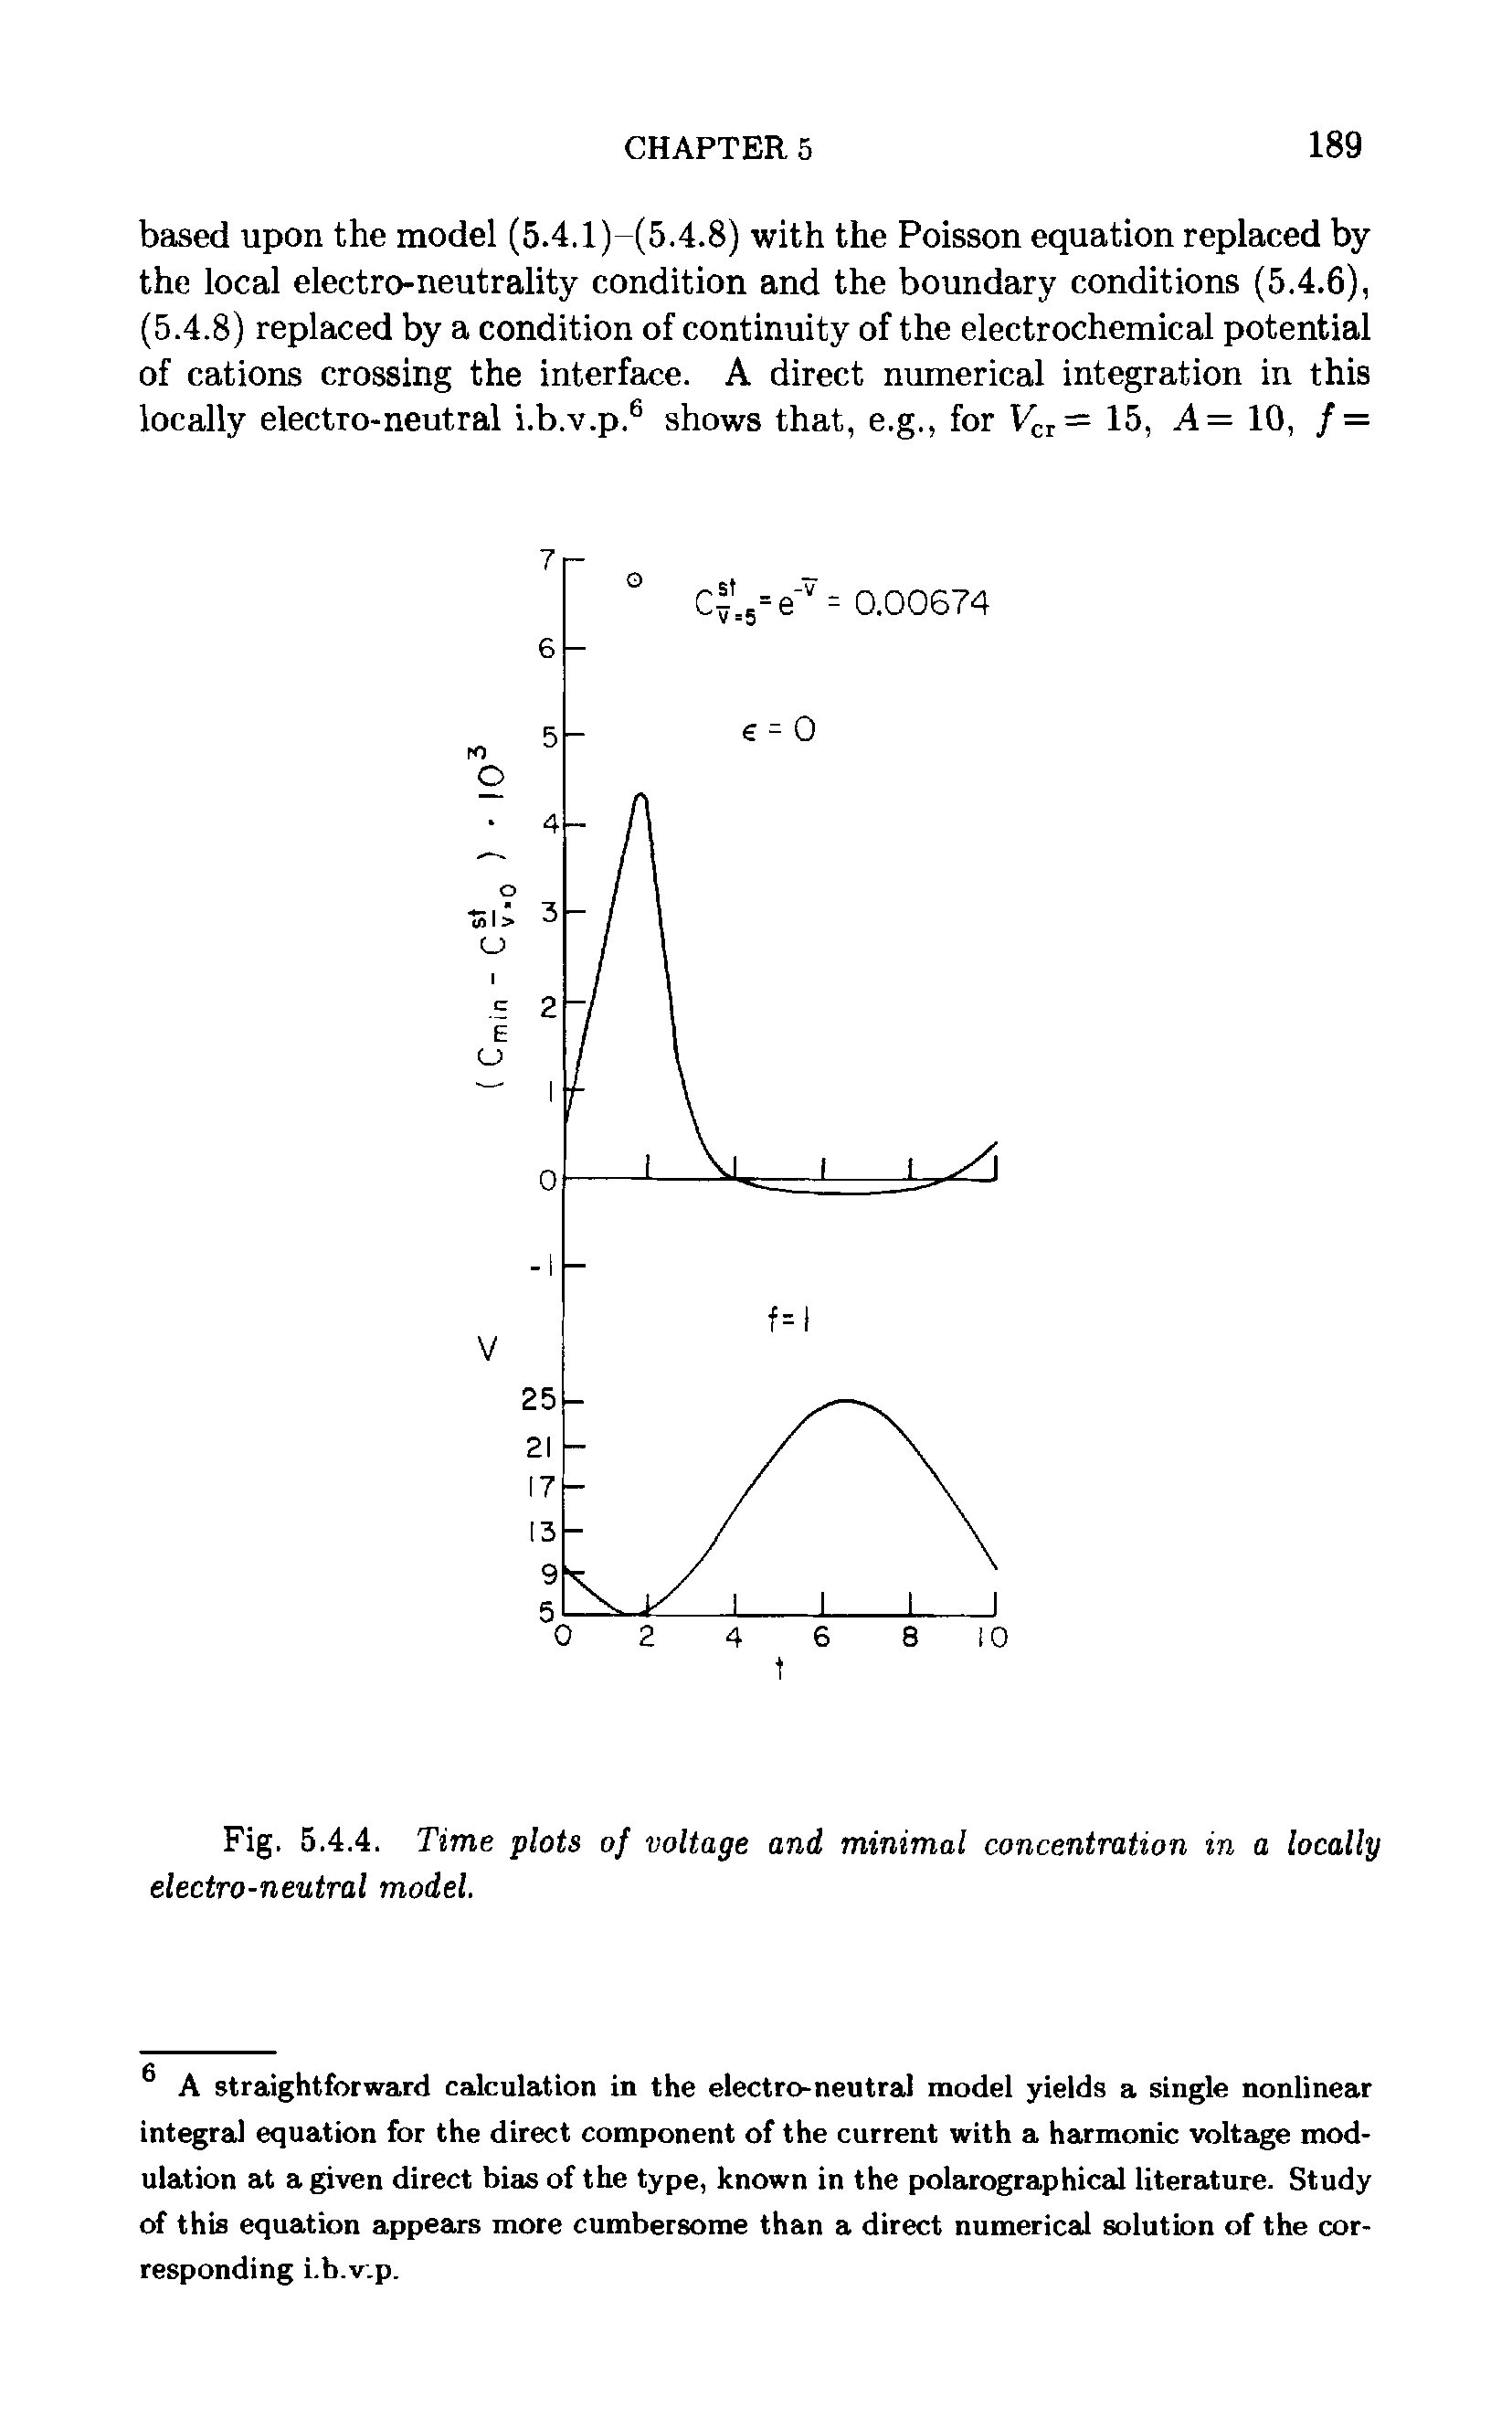 Fig. 5.4.4. Time plots of voltage and minimal concentration in a locally electro-neutral model.